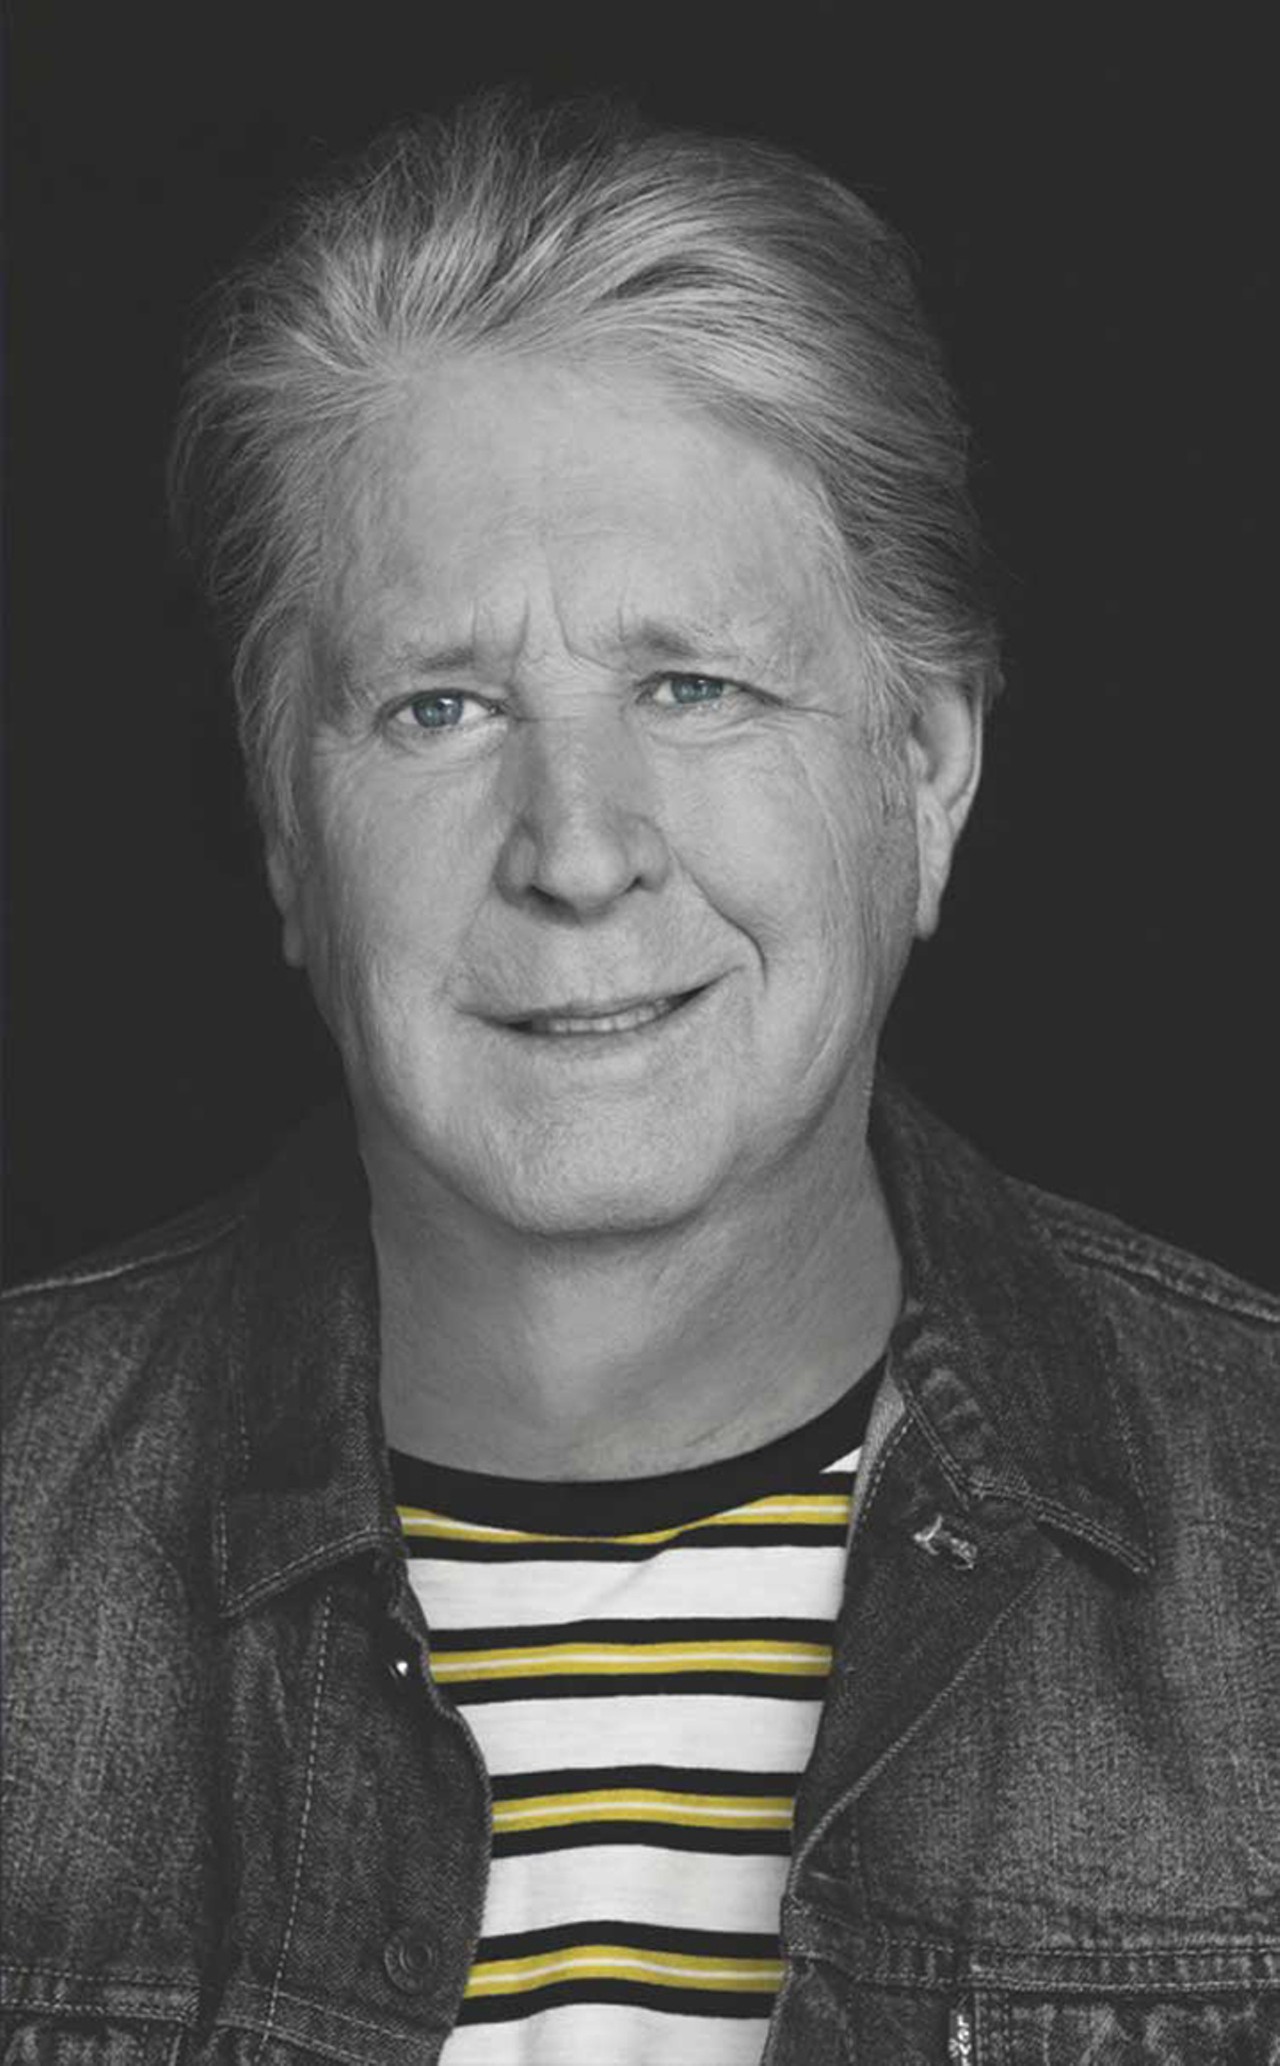 Monday, March 27Brian Wilson Presents Pet Sounds at the Dr. Phillips Center